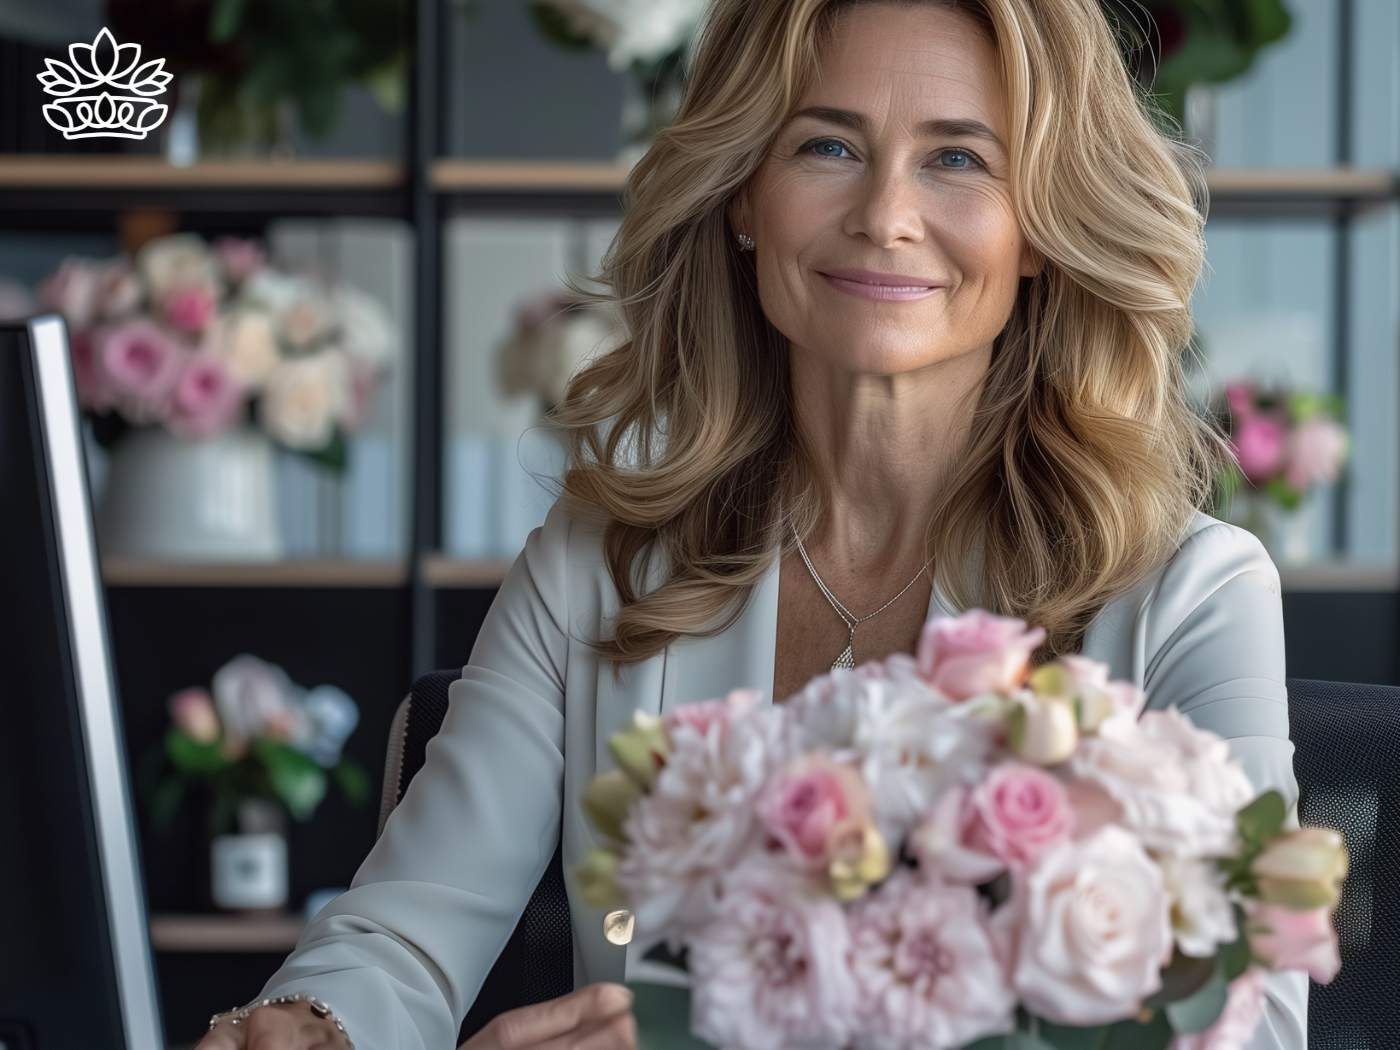 Smiling CEO with a bouquet of fresh roses in soft pinks and greens, perfect for a vibrant office atmosphere, complete with delicate mist droplets, from Fabulous Flowers and Gifts.